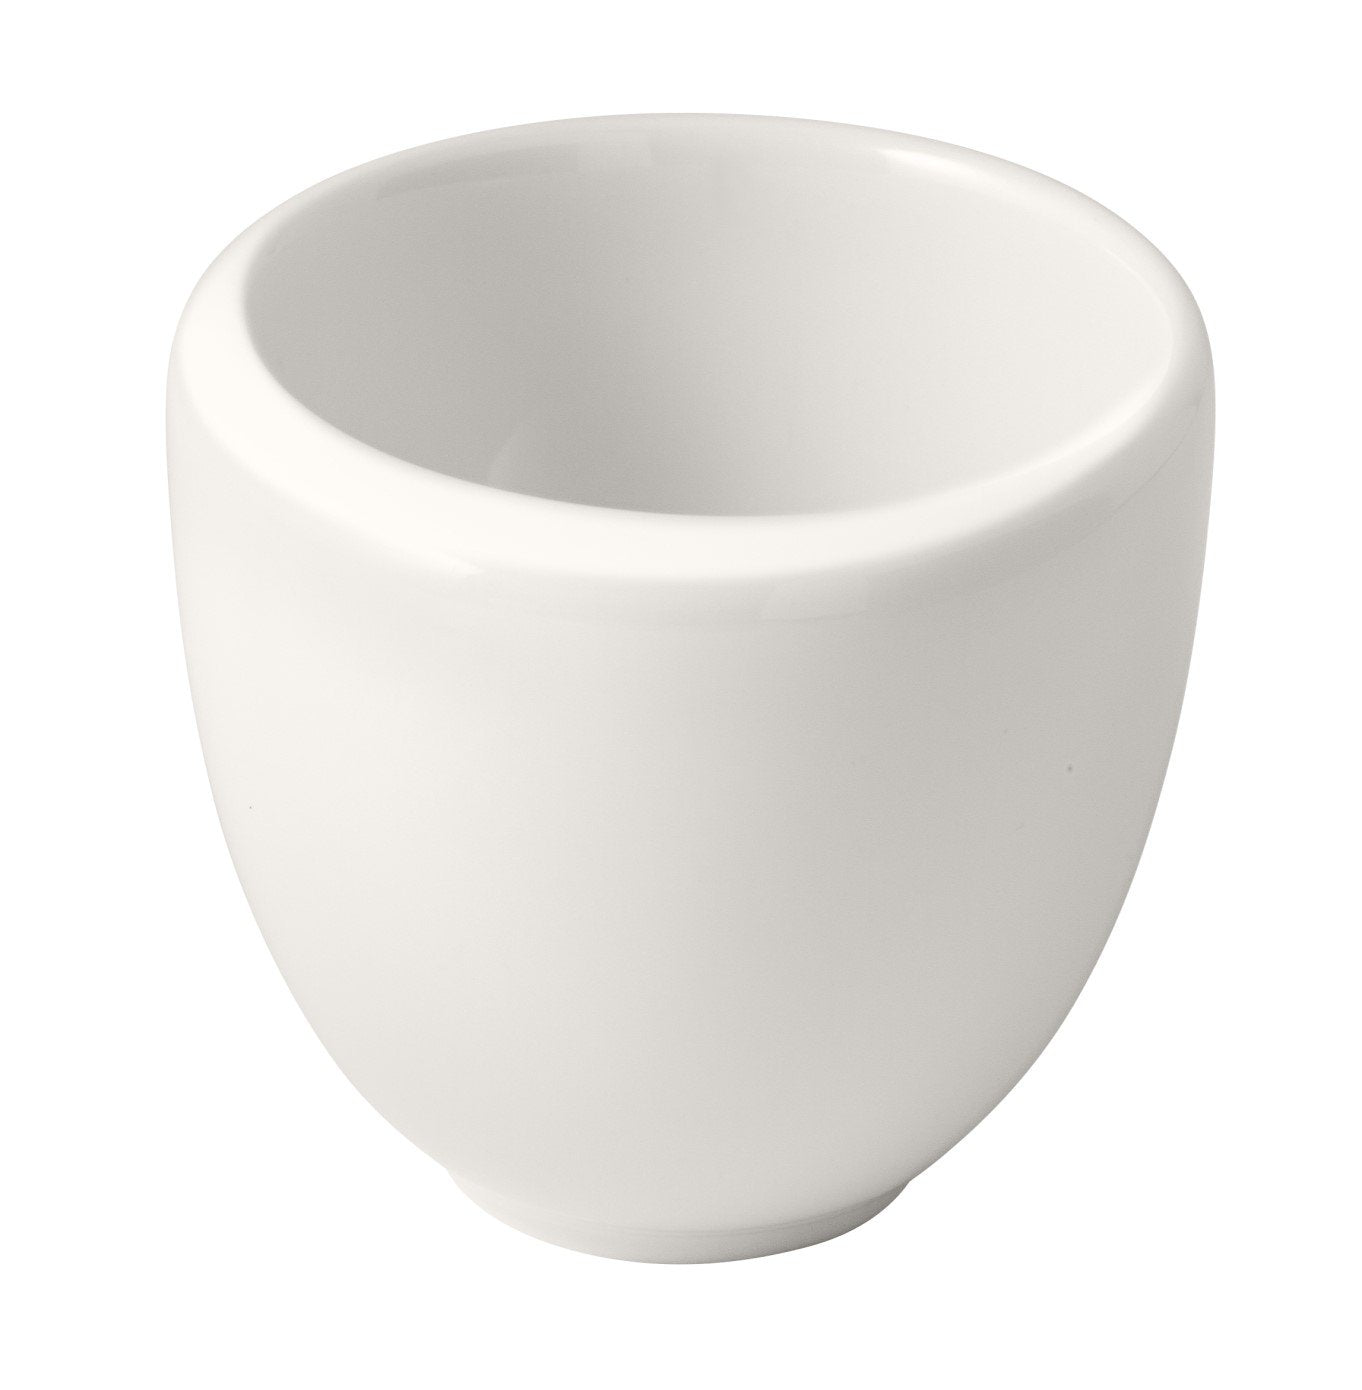 NewMoon espresso cup without handle 90ml. Set of  6